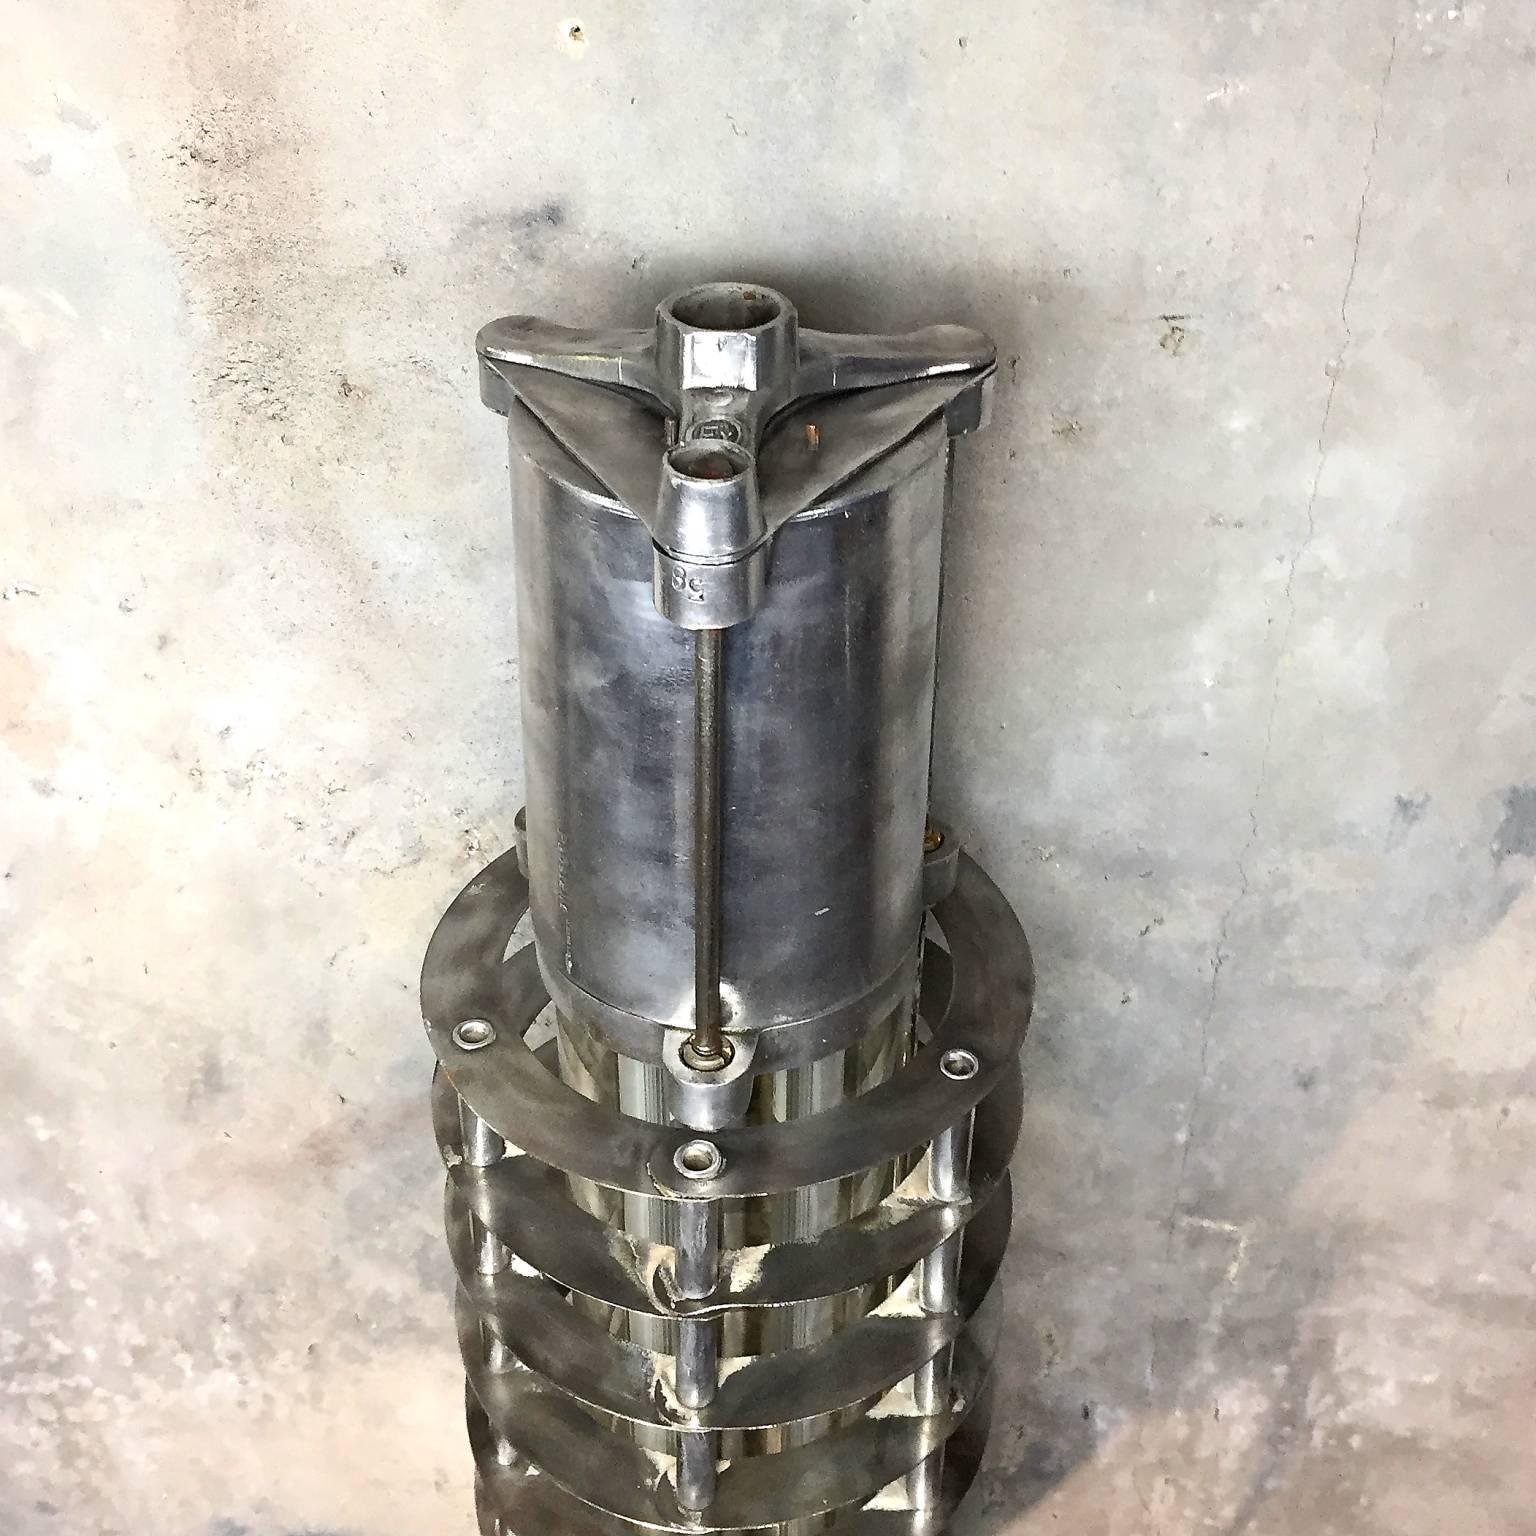 Wittenberg wall-mounted German flame proof strip light.

Original item salvaged from supertankers and military vessels then stripped and refinished in the UK.

The original wiring is replaced with our Loomlight wiring system which exceeds the